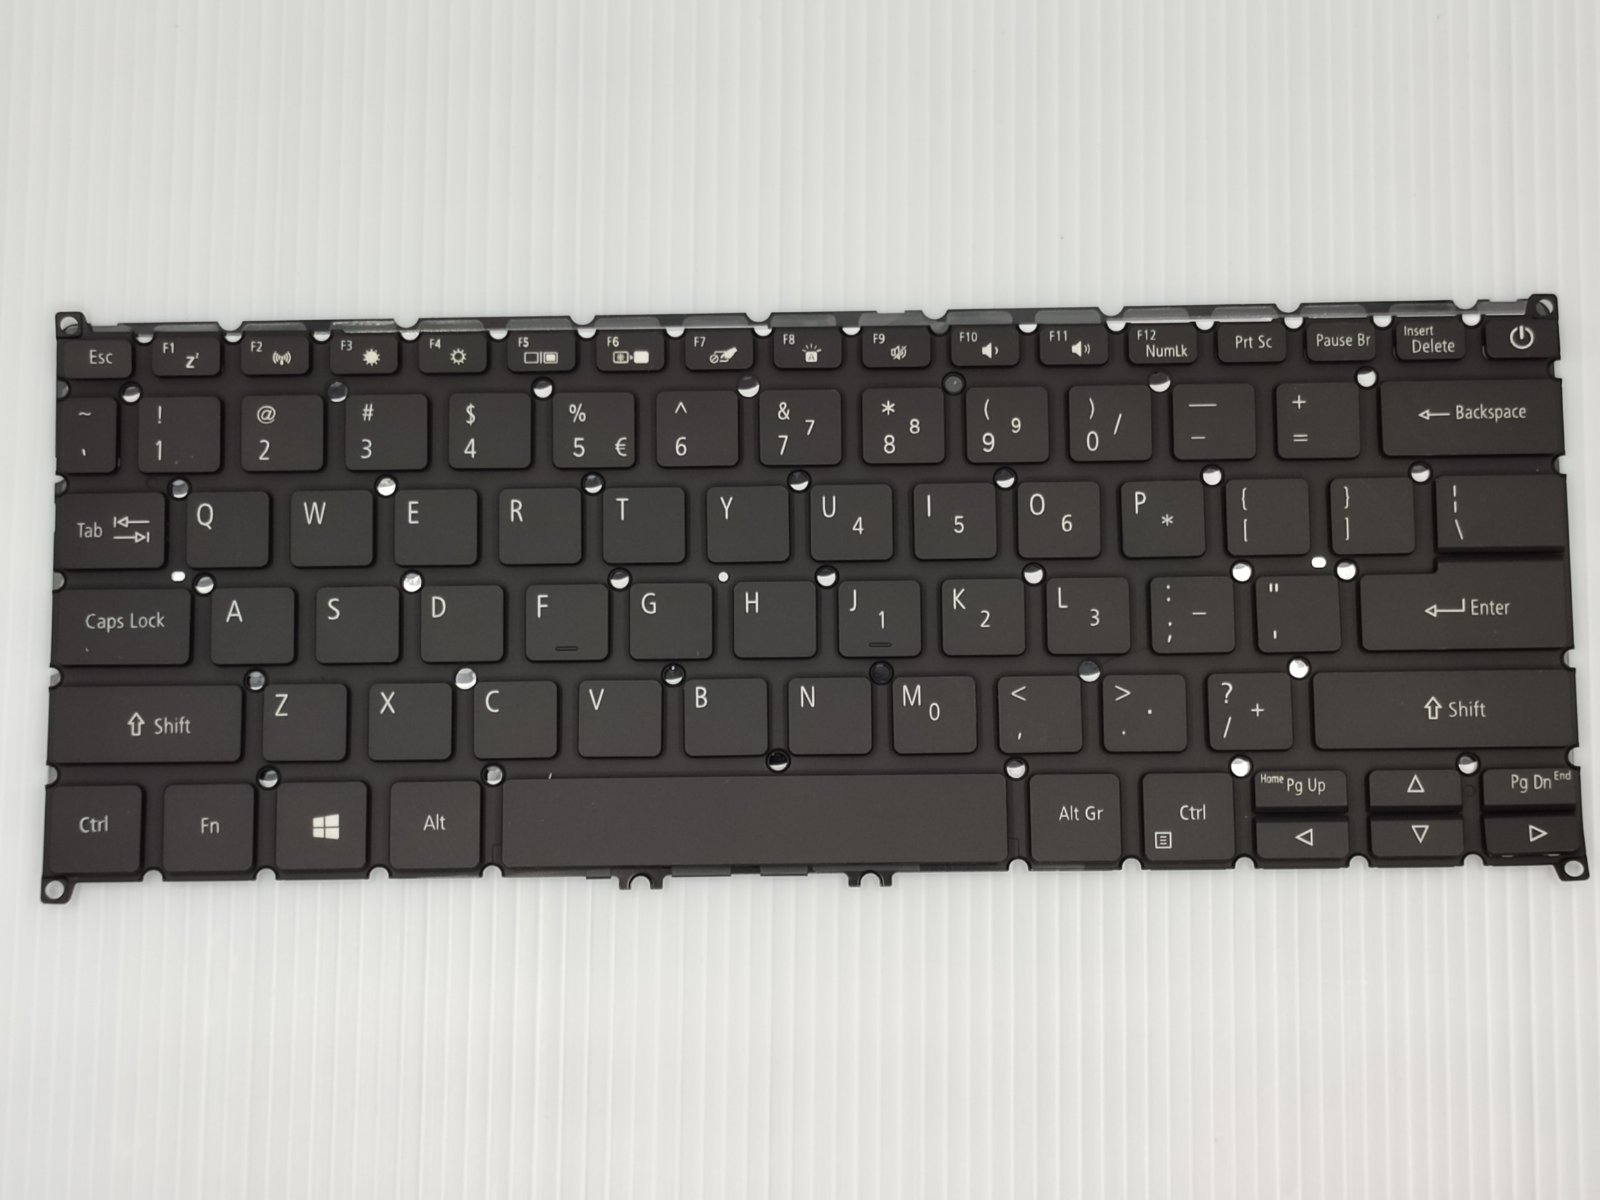 Replacement Keyboard for Acer A514-53 WL